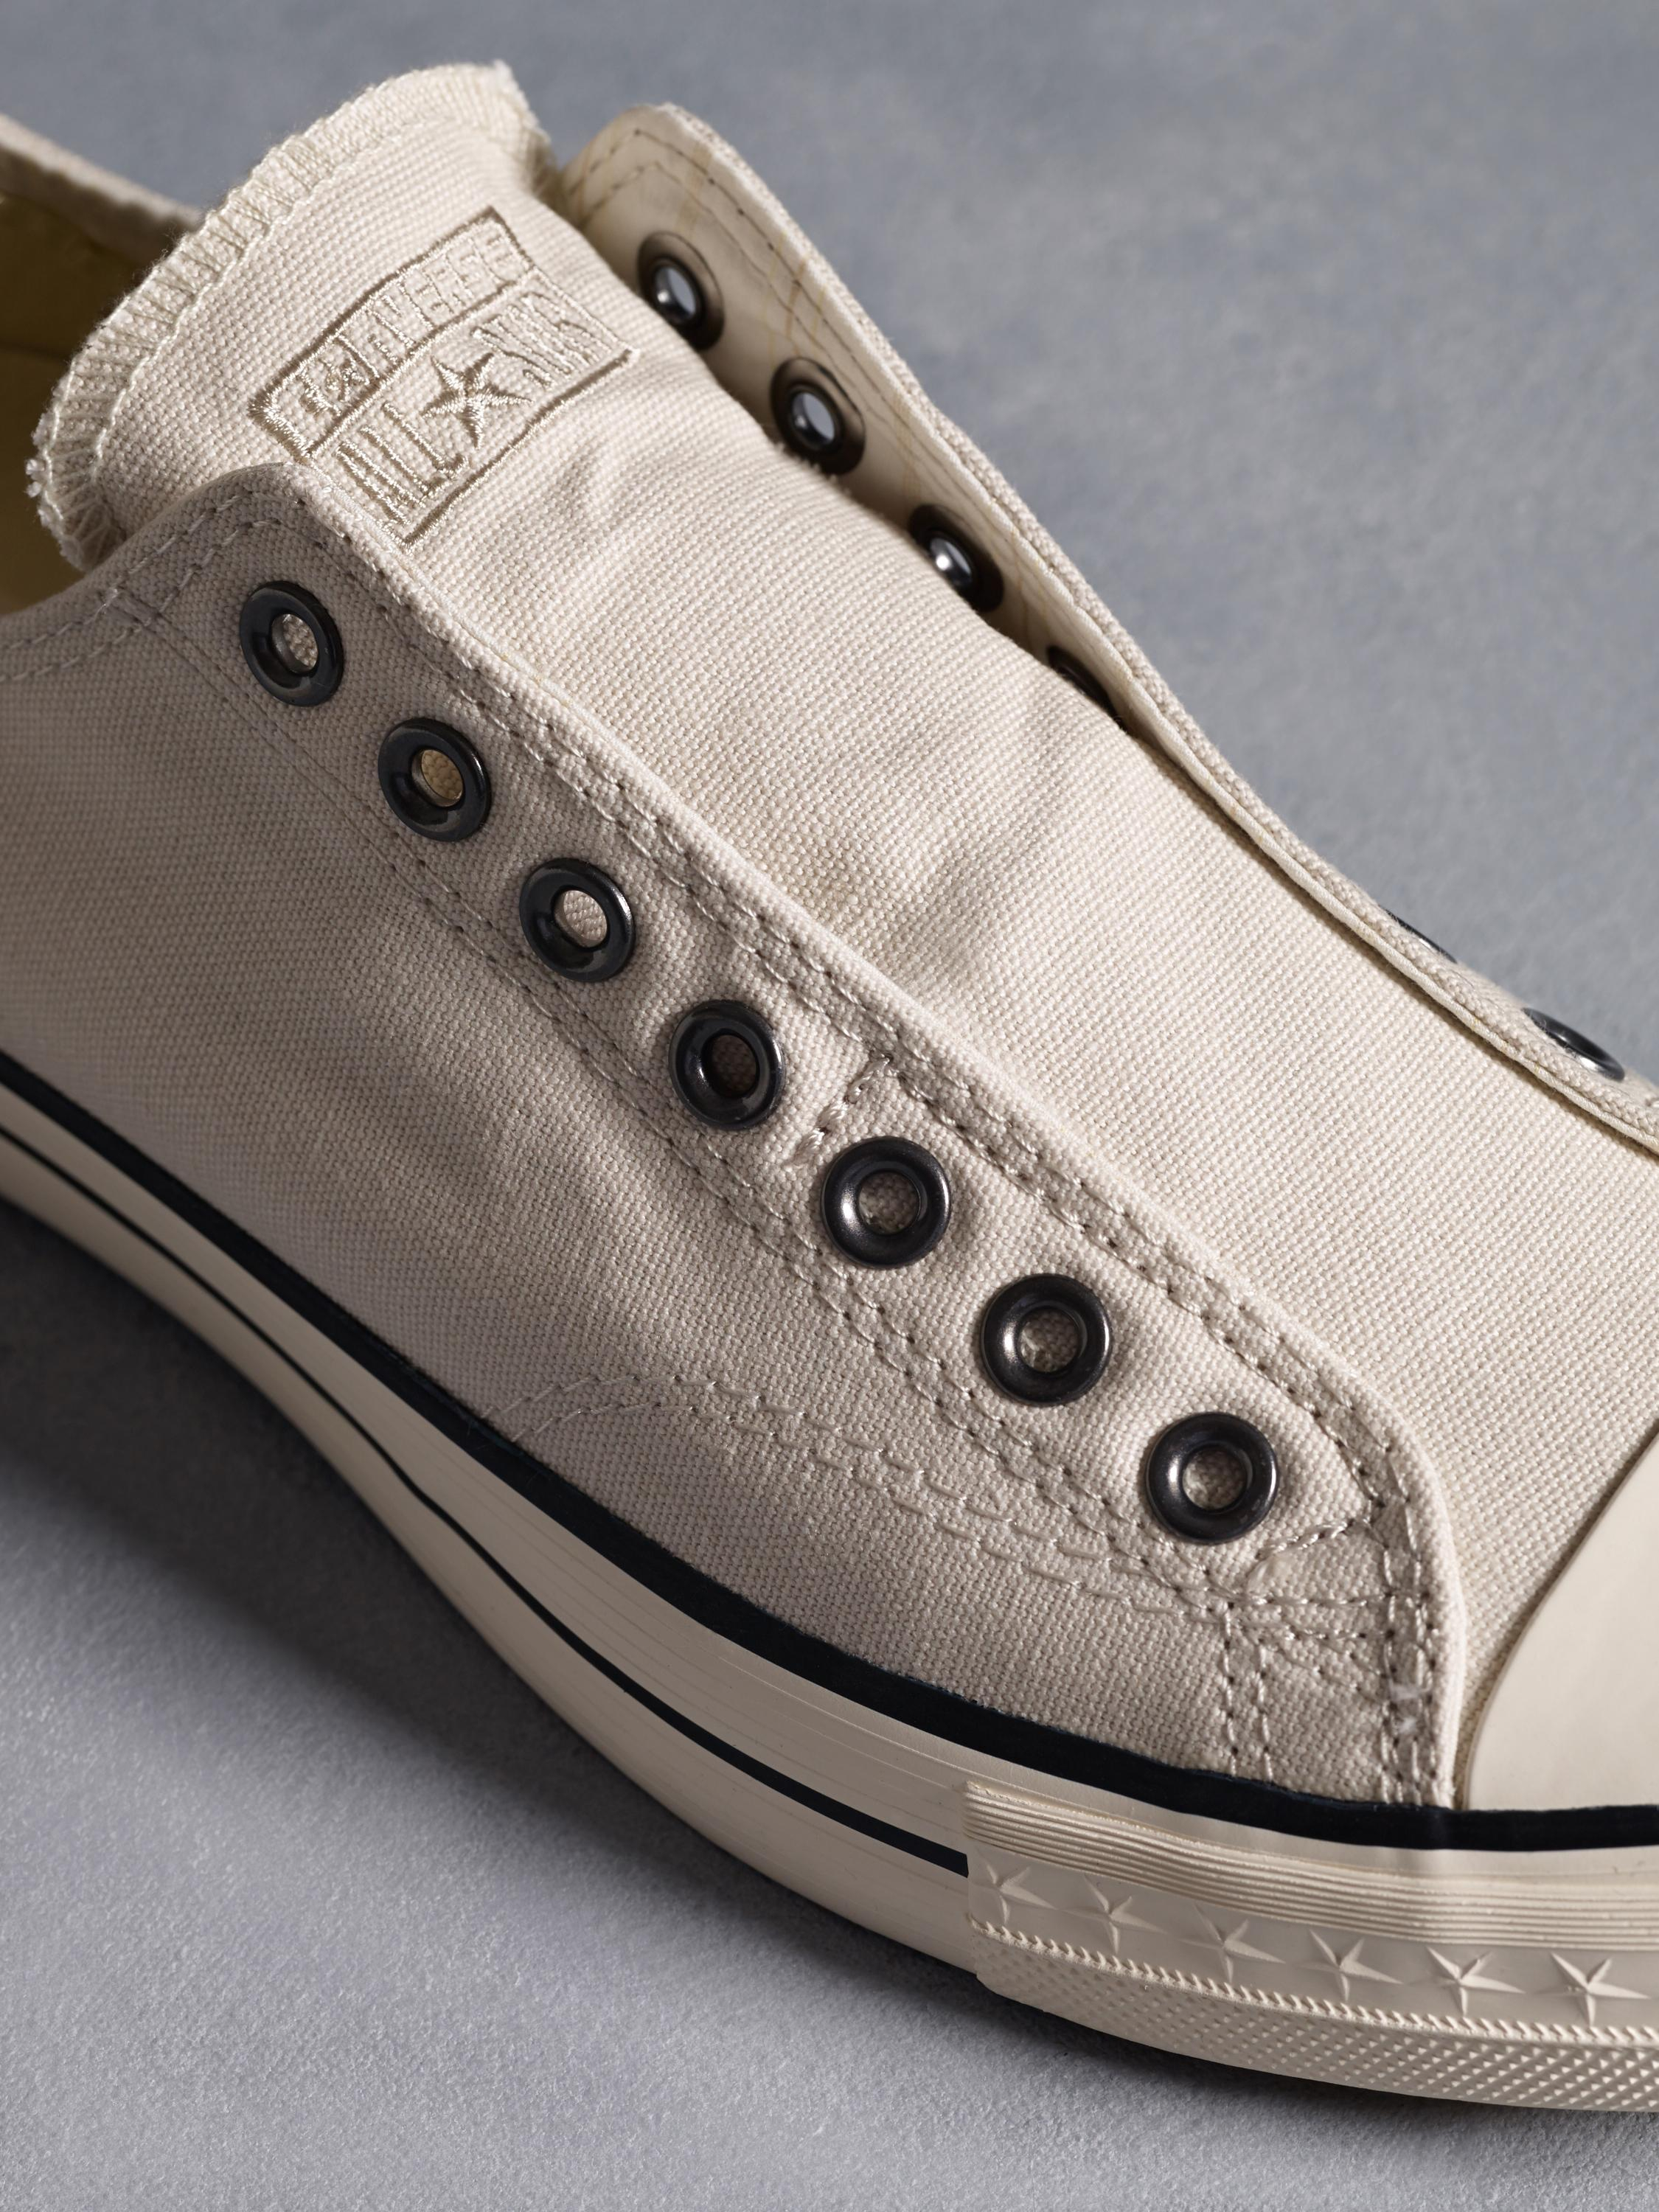 John Varvatos Laceless Chuck Taylor in White for Men - Lyst